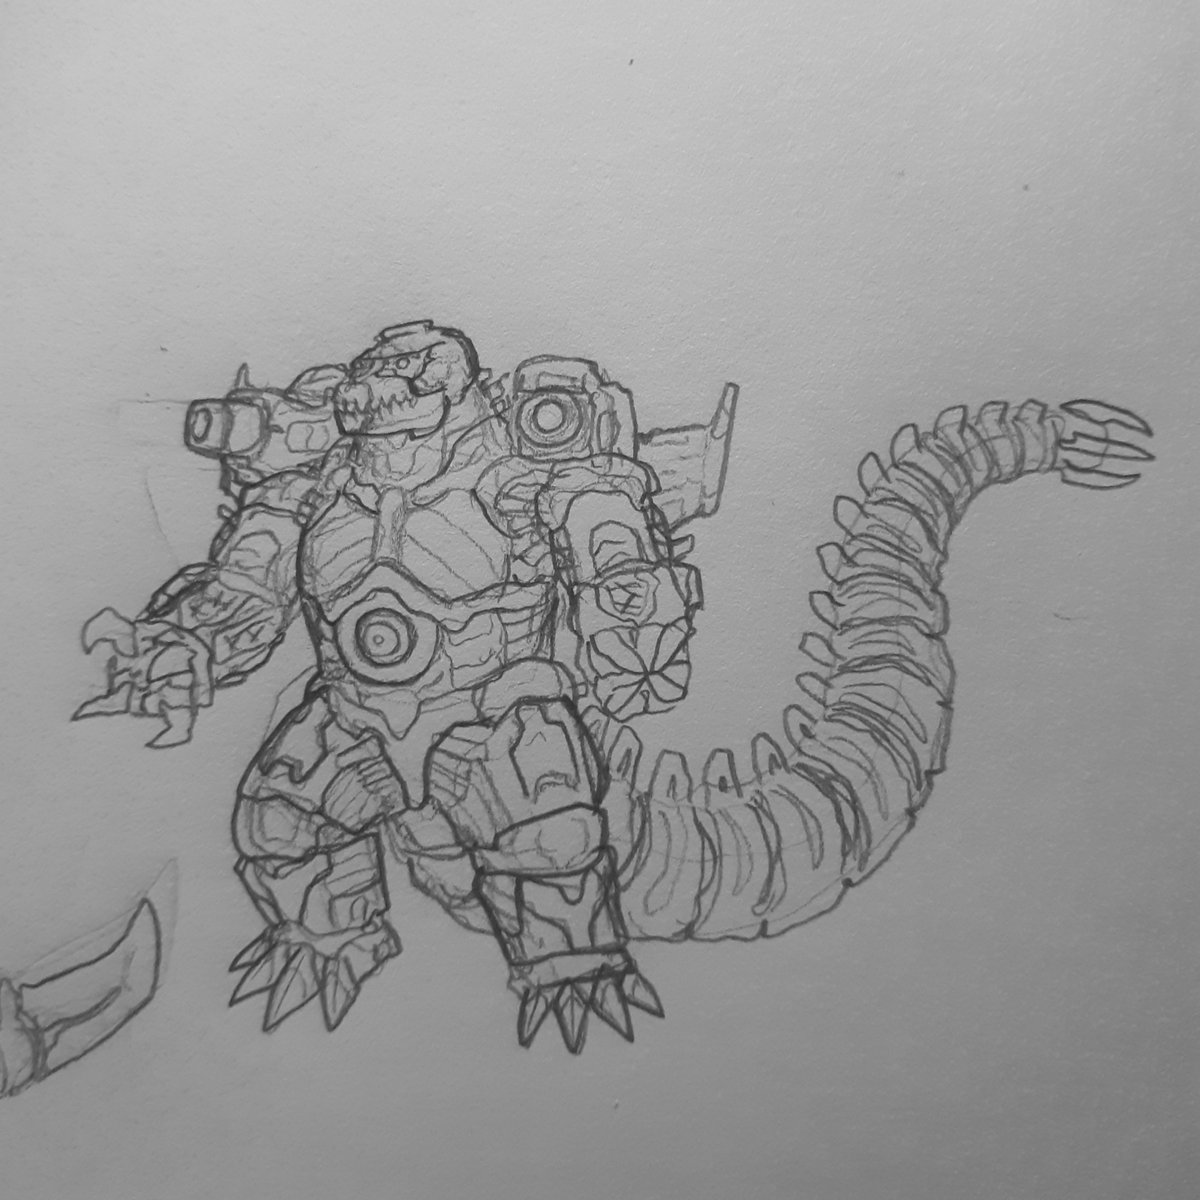 Some Mechagodzilla ideas, I plan on revisiting the 2nd one and changing the proportions